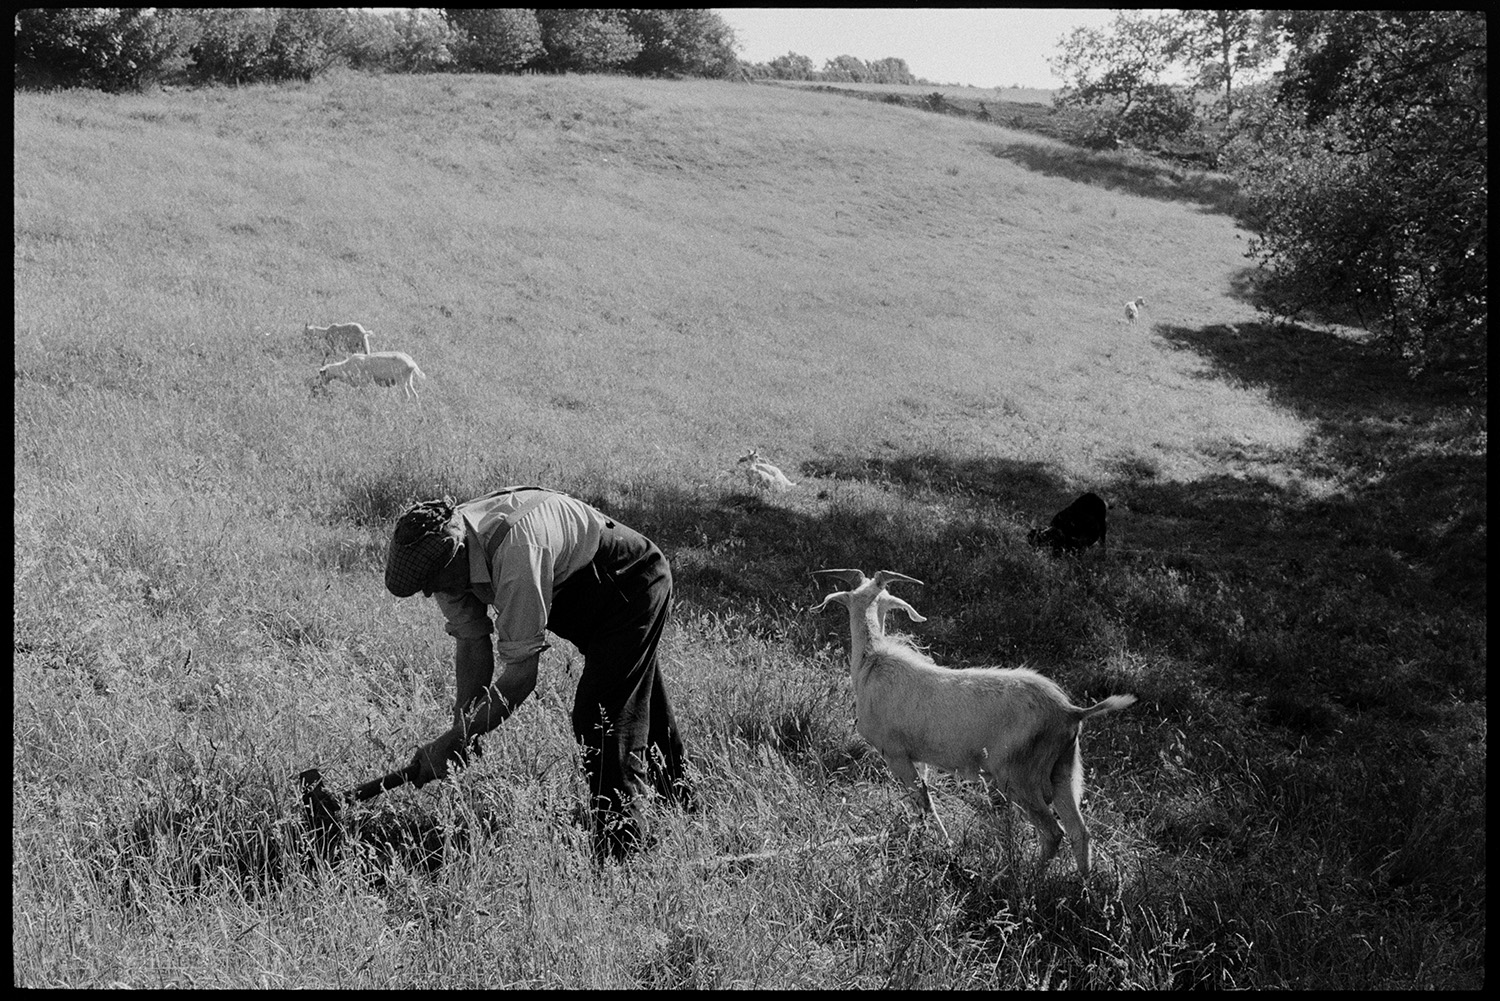 Farmer tethering goats.
[George Ayre tethering a goat in a field at Millhams, Dolton, with other goats grazing in the field.]